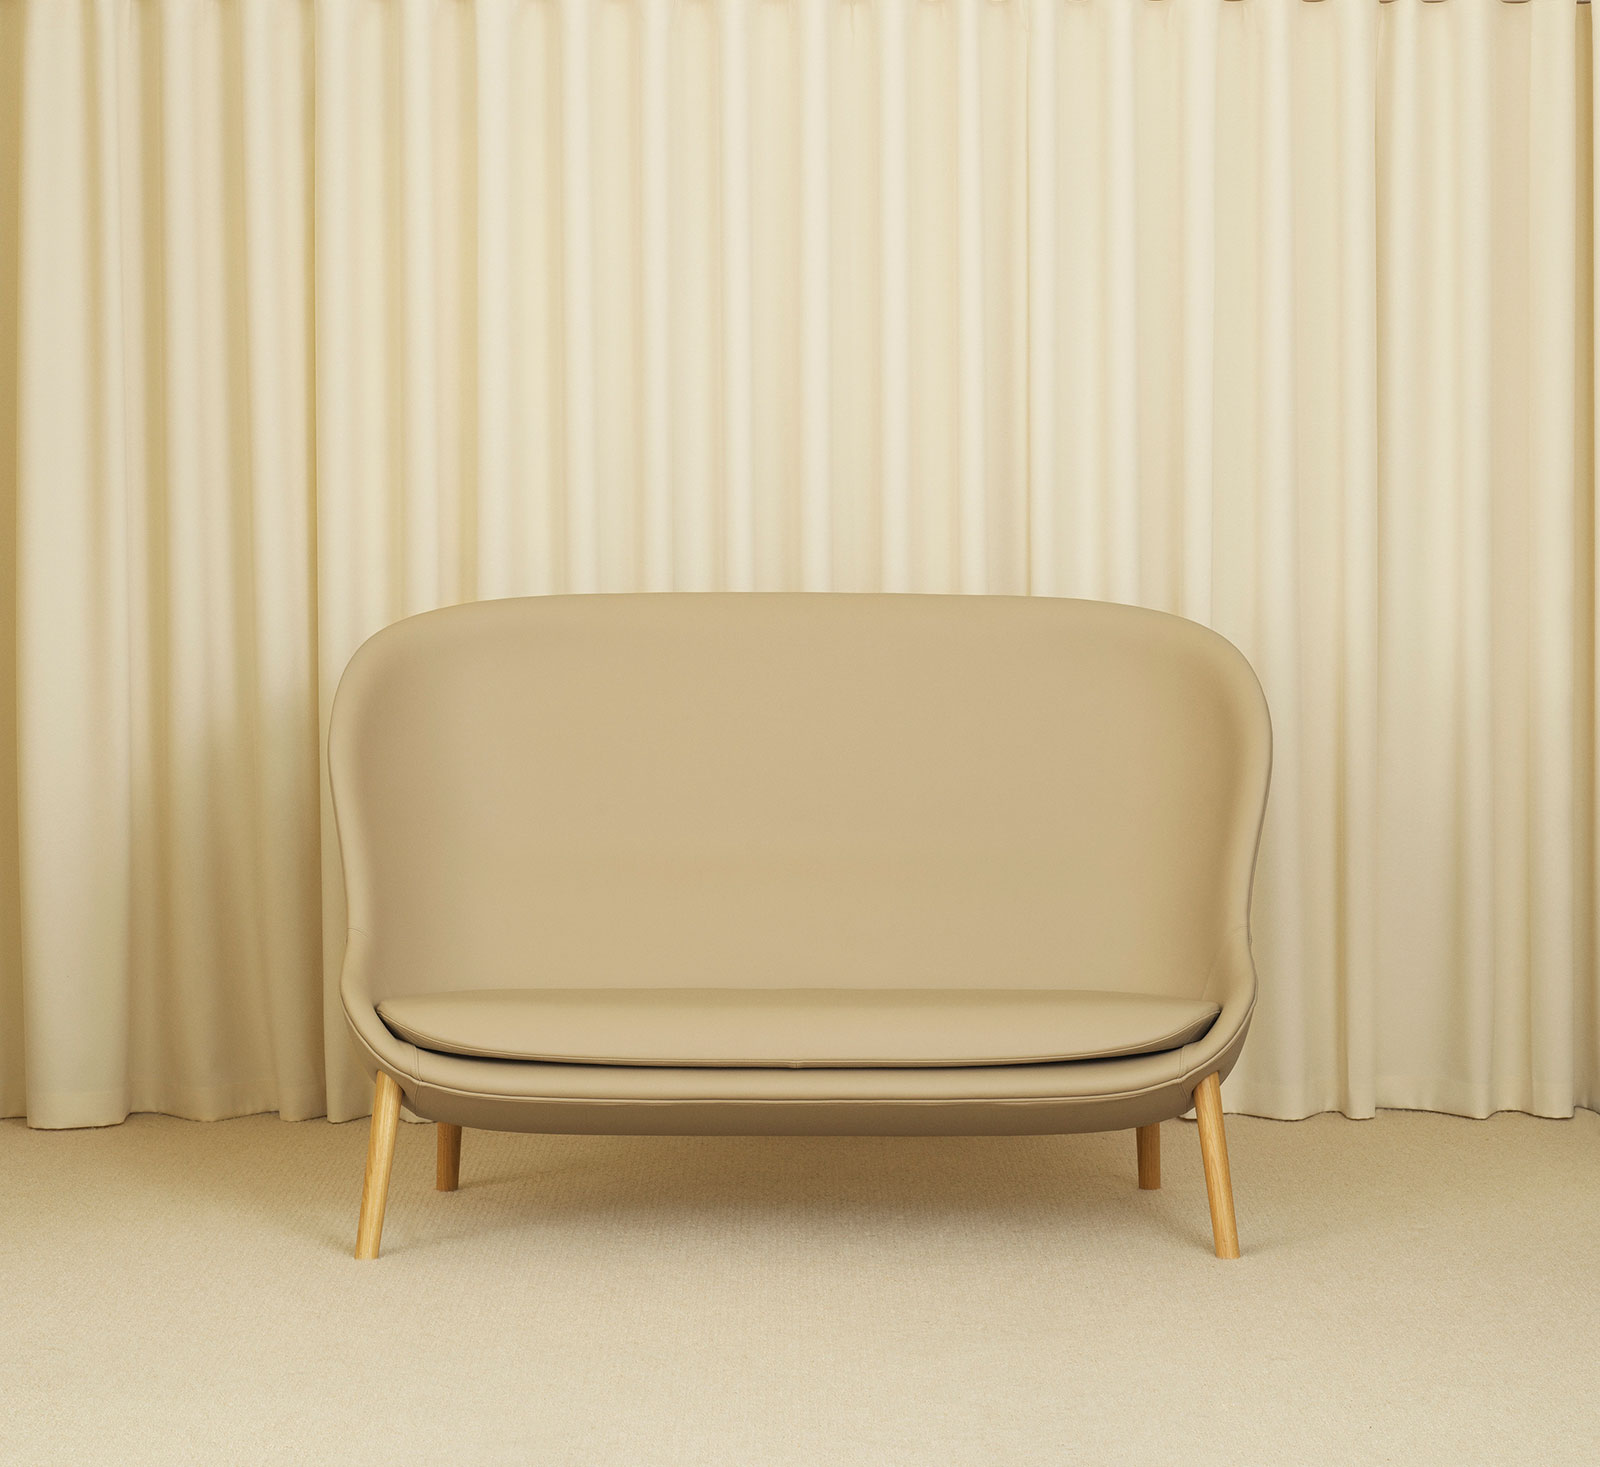 Hyg Sofa in front of beige curtains